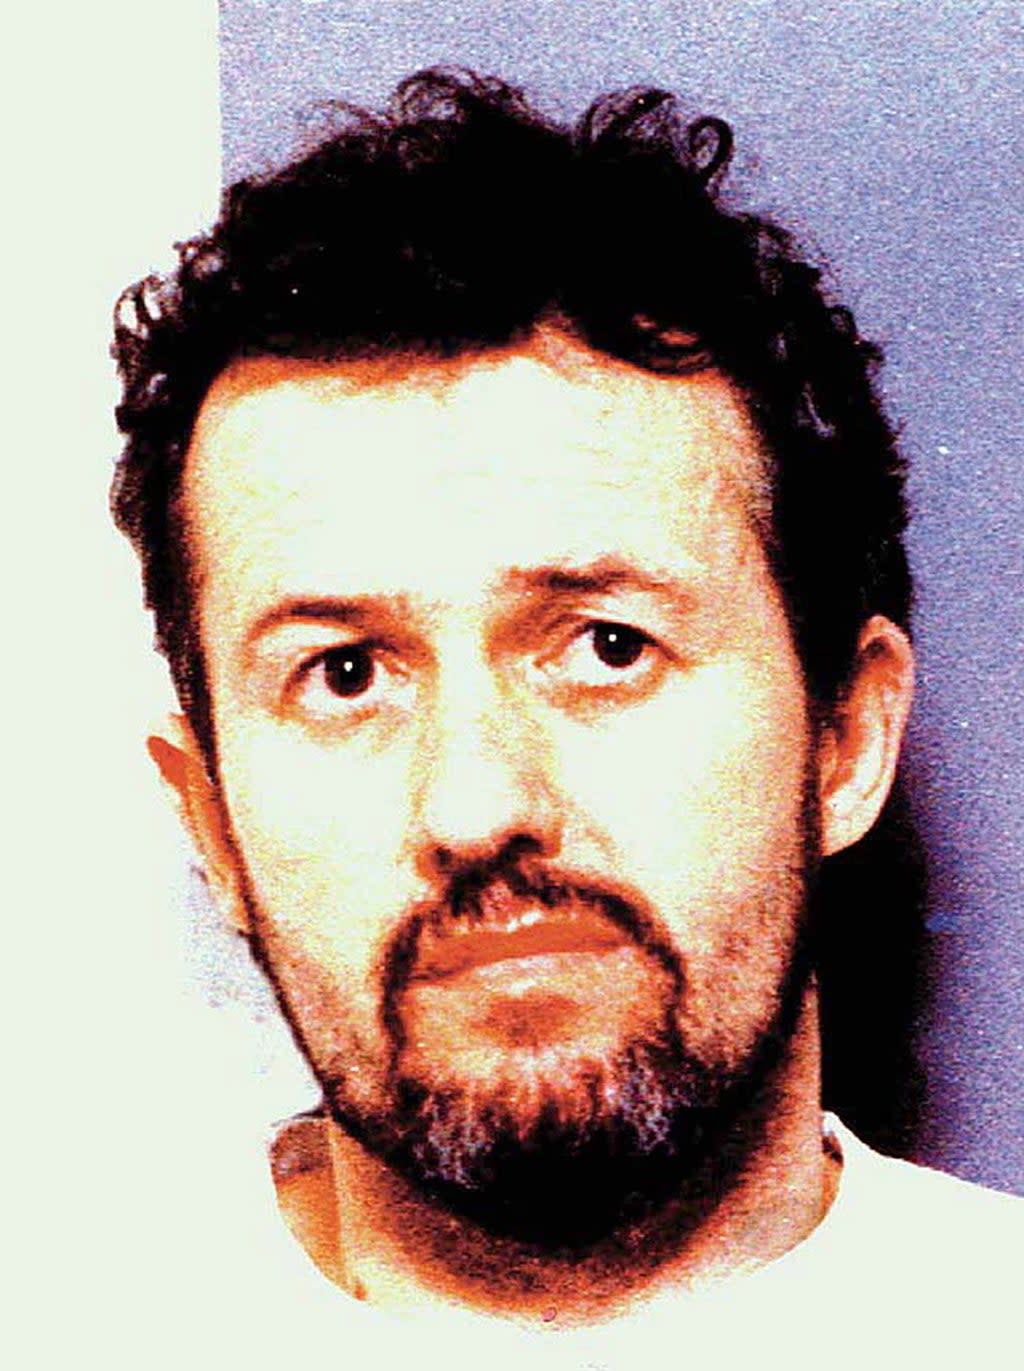 BEST QUALITY AVAILABLE Undated file photo of ex-football coach and convicted paedophile Barry Bennell, who has told a High Court judge that he was not linked to Manchester City four decades ago after eight men who say he abused them made damages claims. Issue date: Tuesday November 30, 2021. (PA Wire)